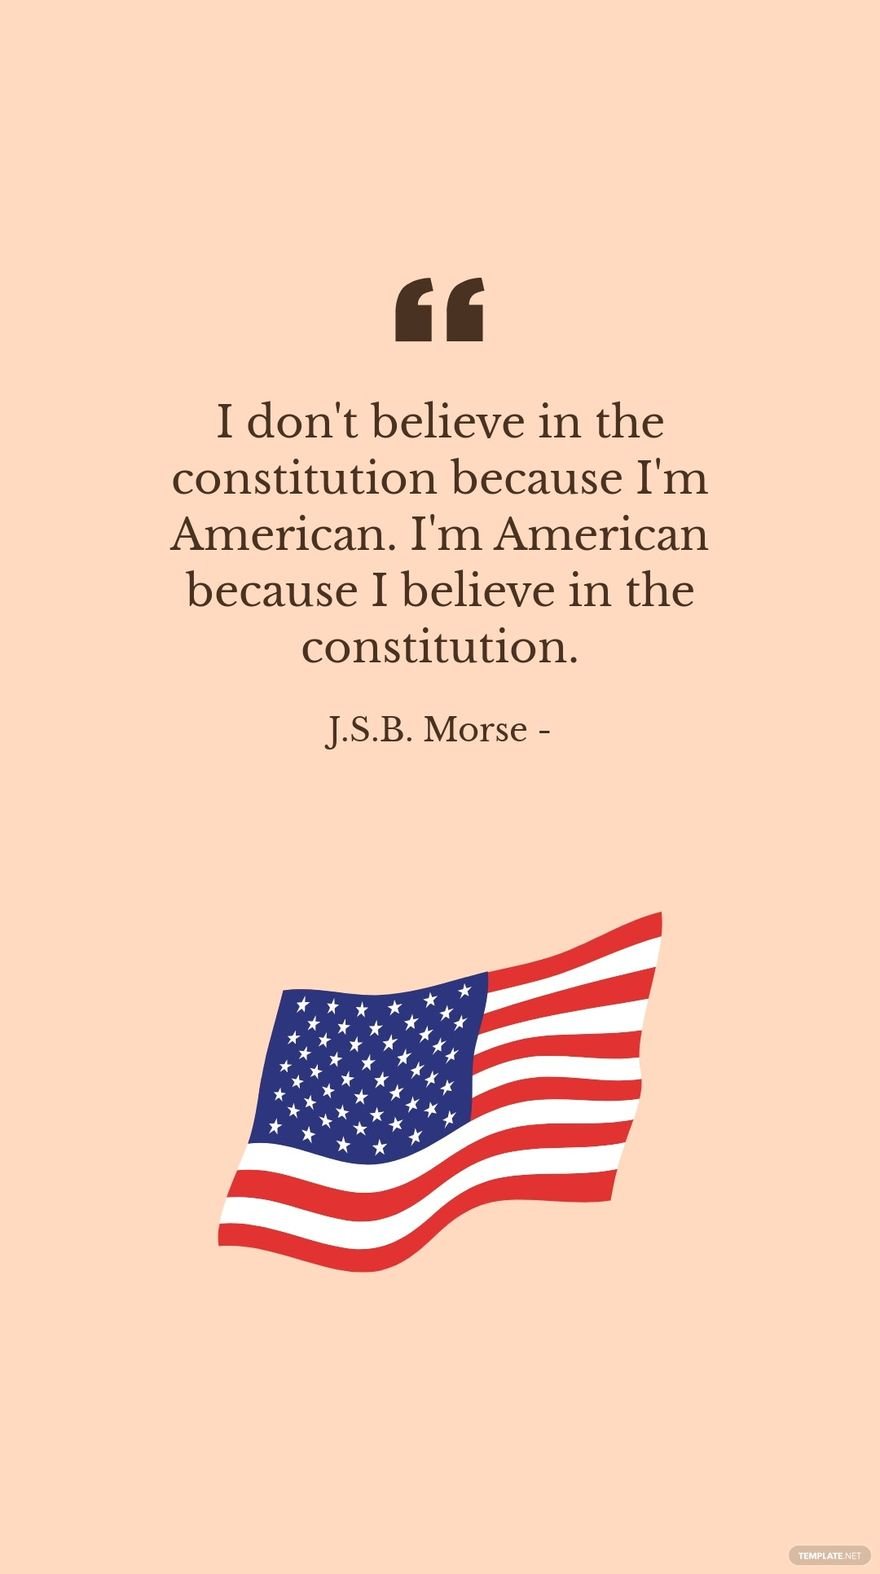 J.S.B. Morse - I don't believe in the constitution because I'm American. I'm American because I believe in the constitution.